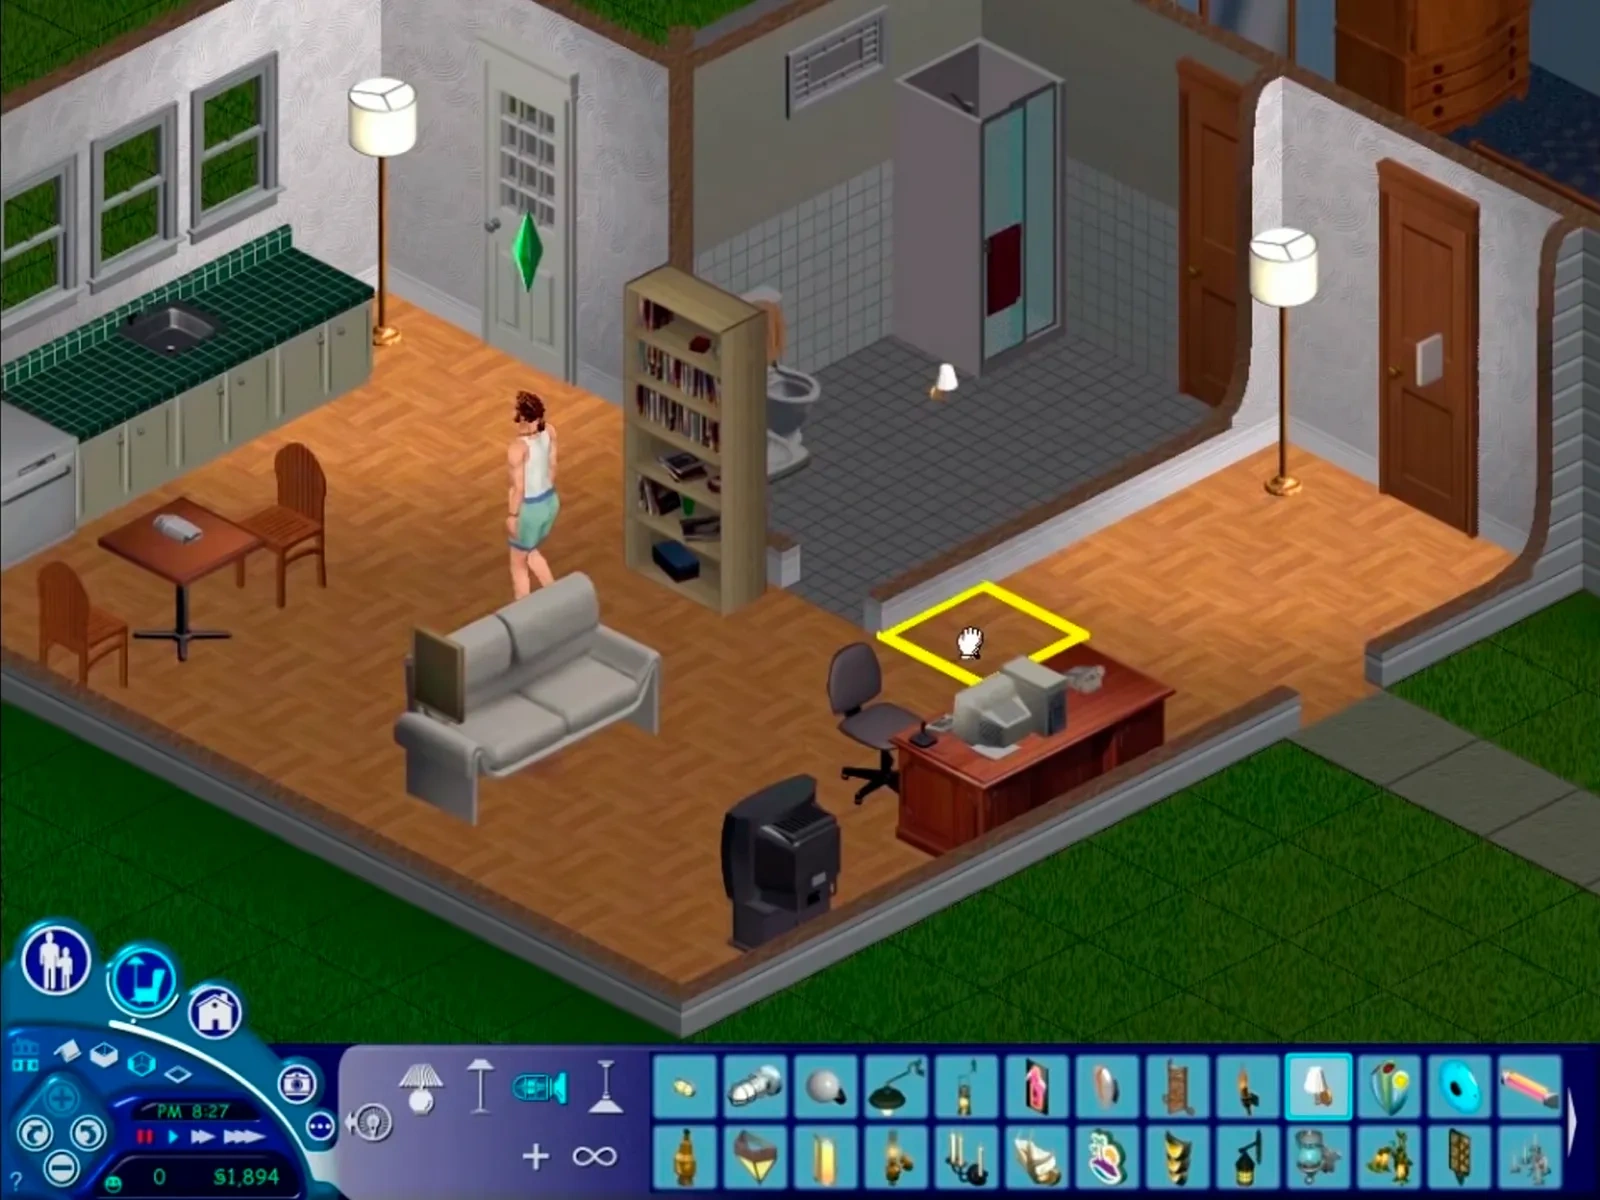 100 best games_0059_The sims.webp